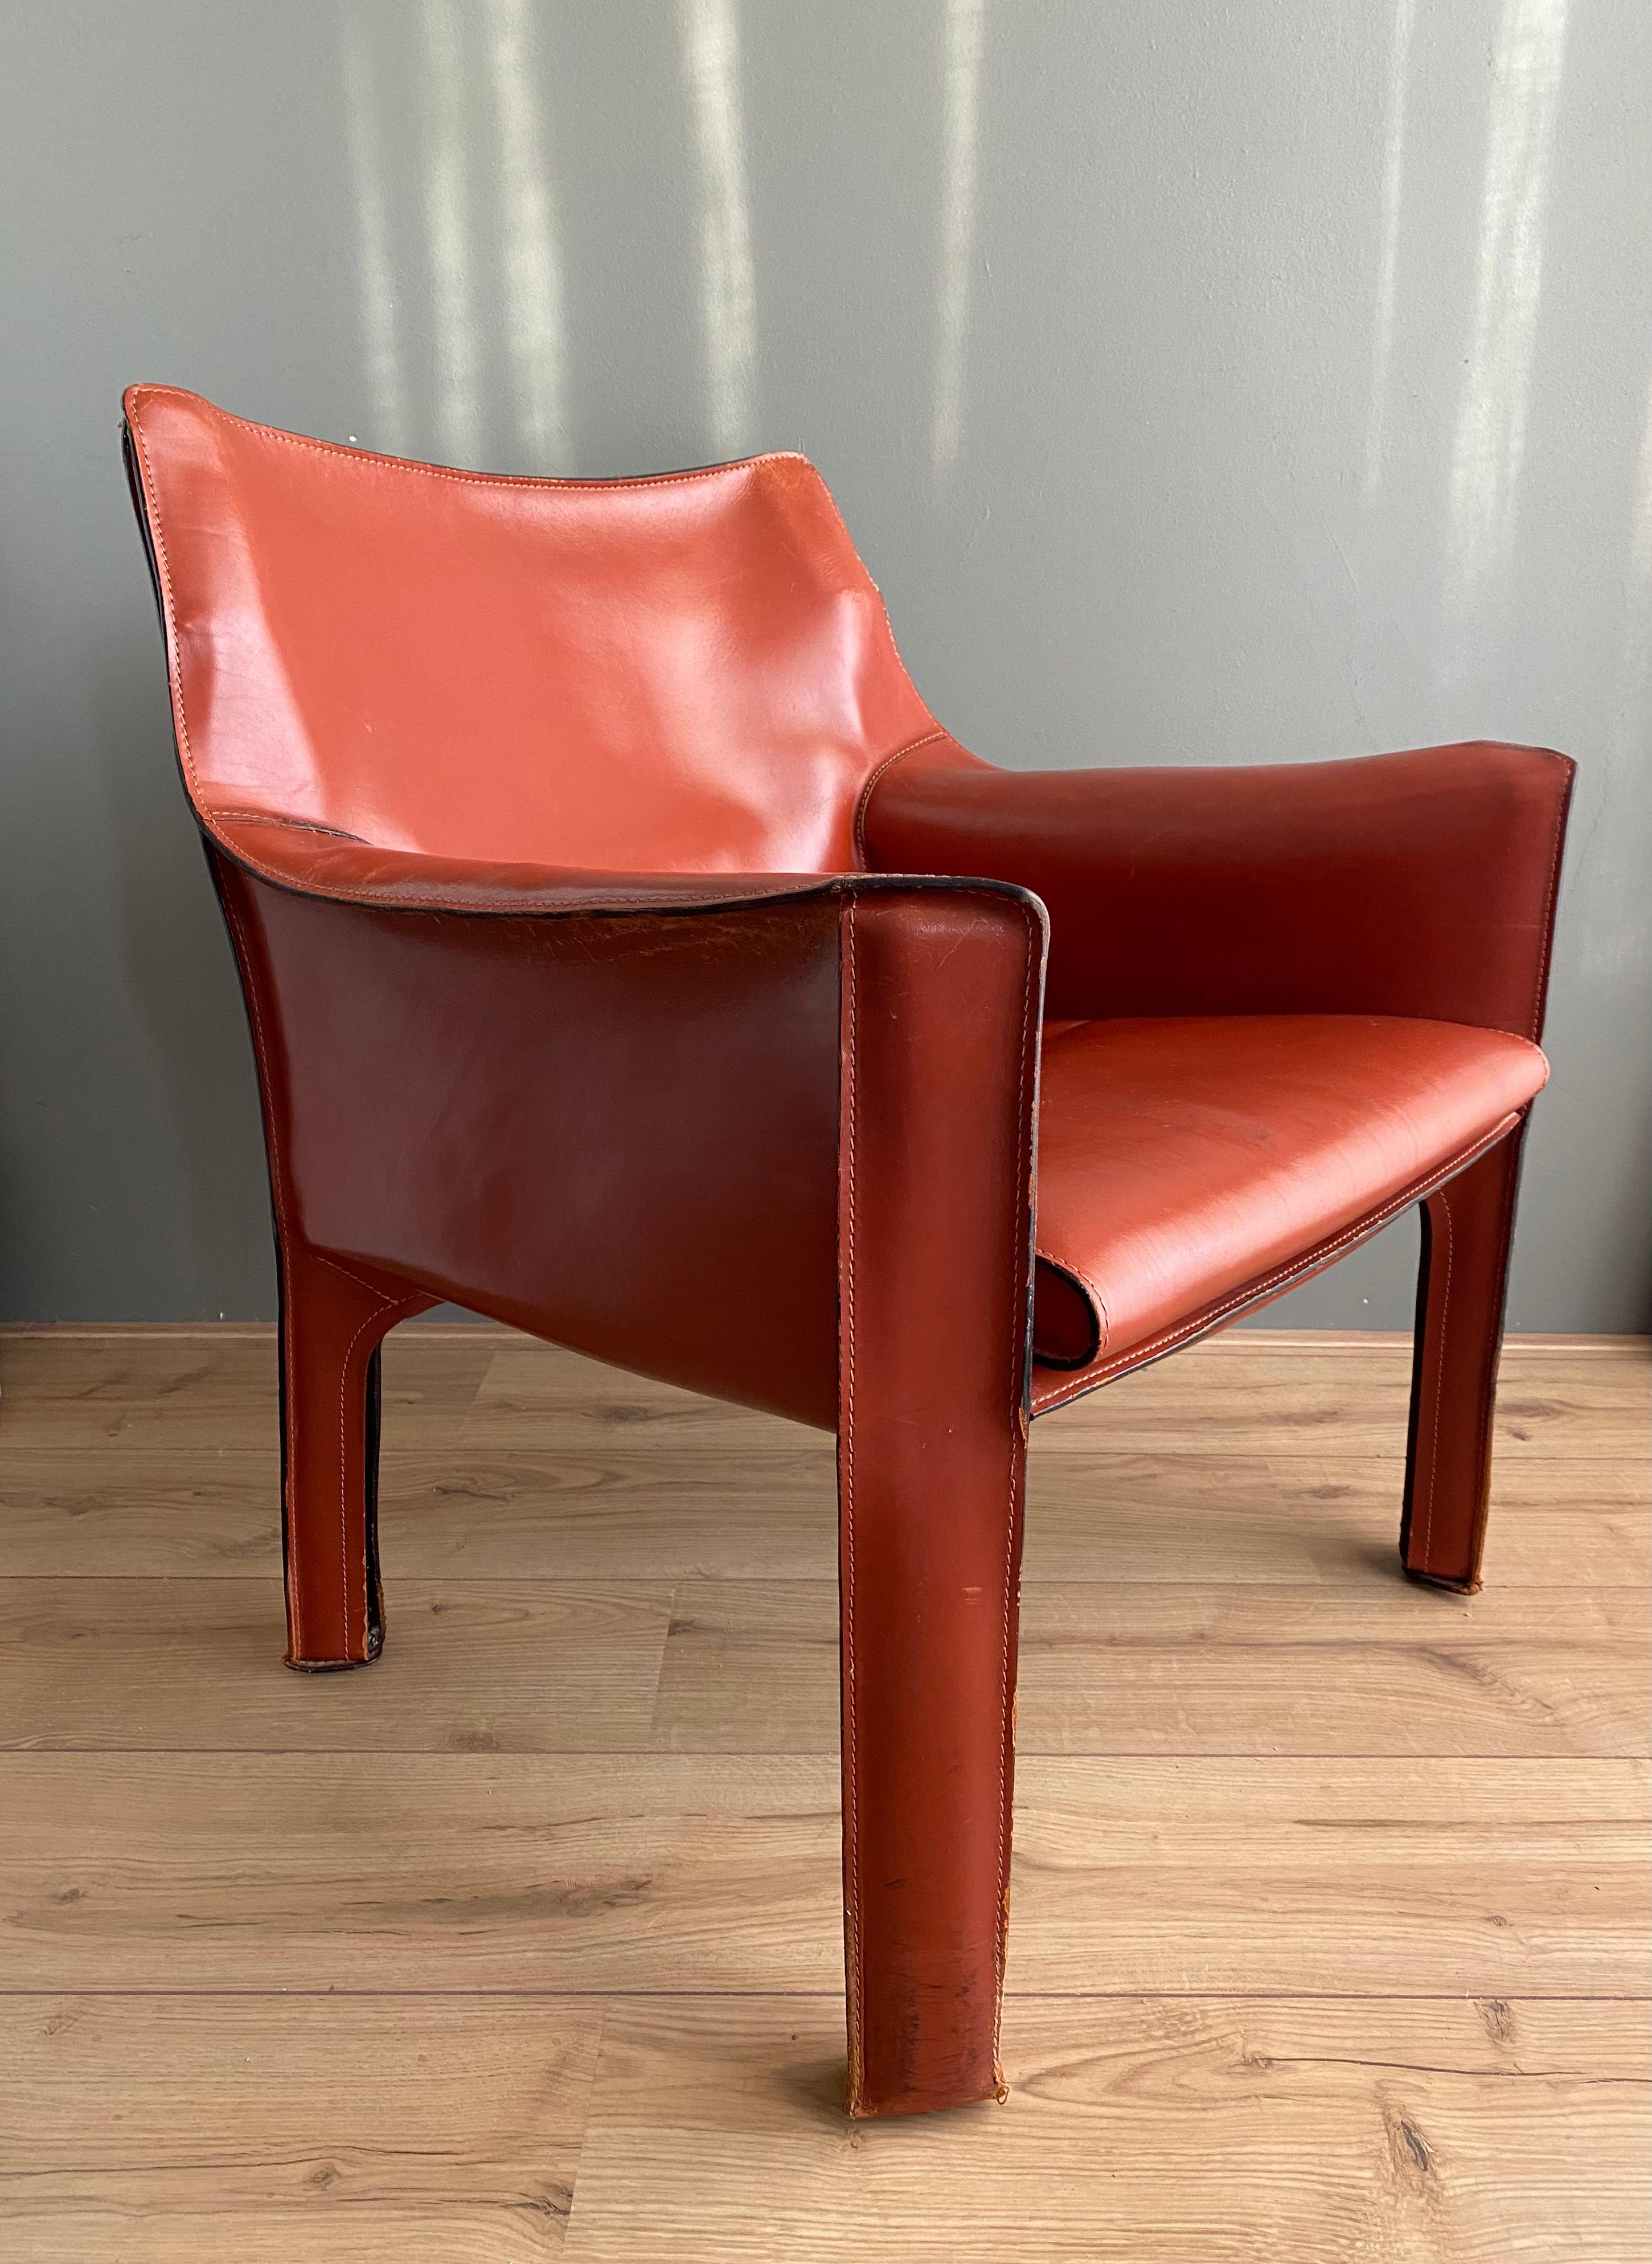 Italian Cognac Leather Cab Lounge Chair by Mario Bellini, 1970s For Sale